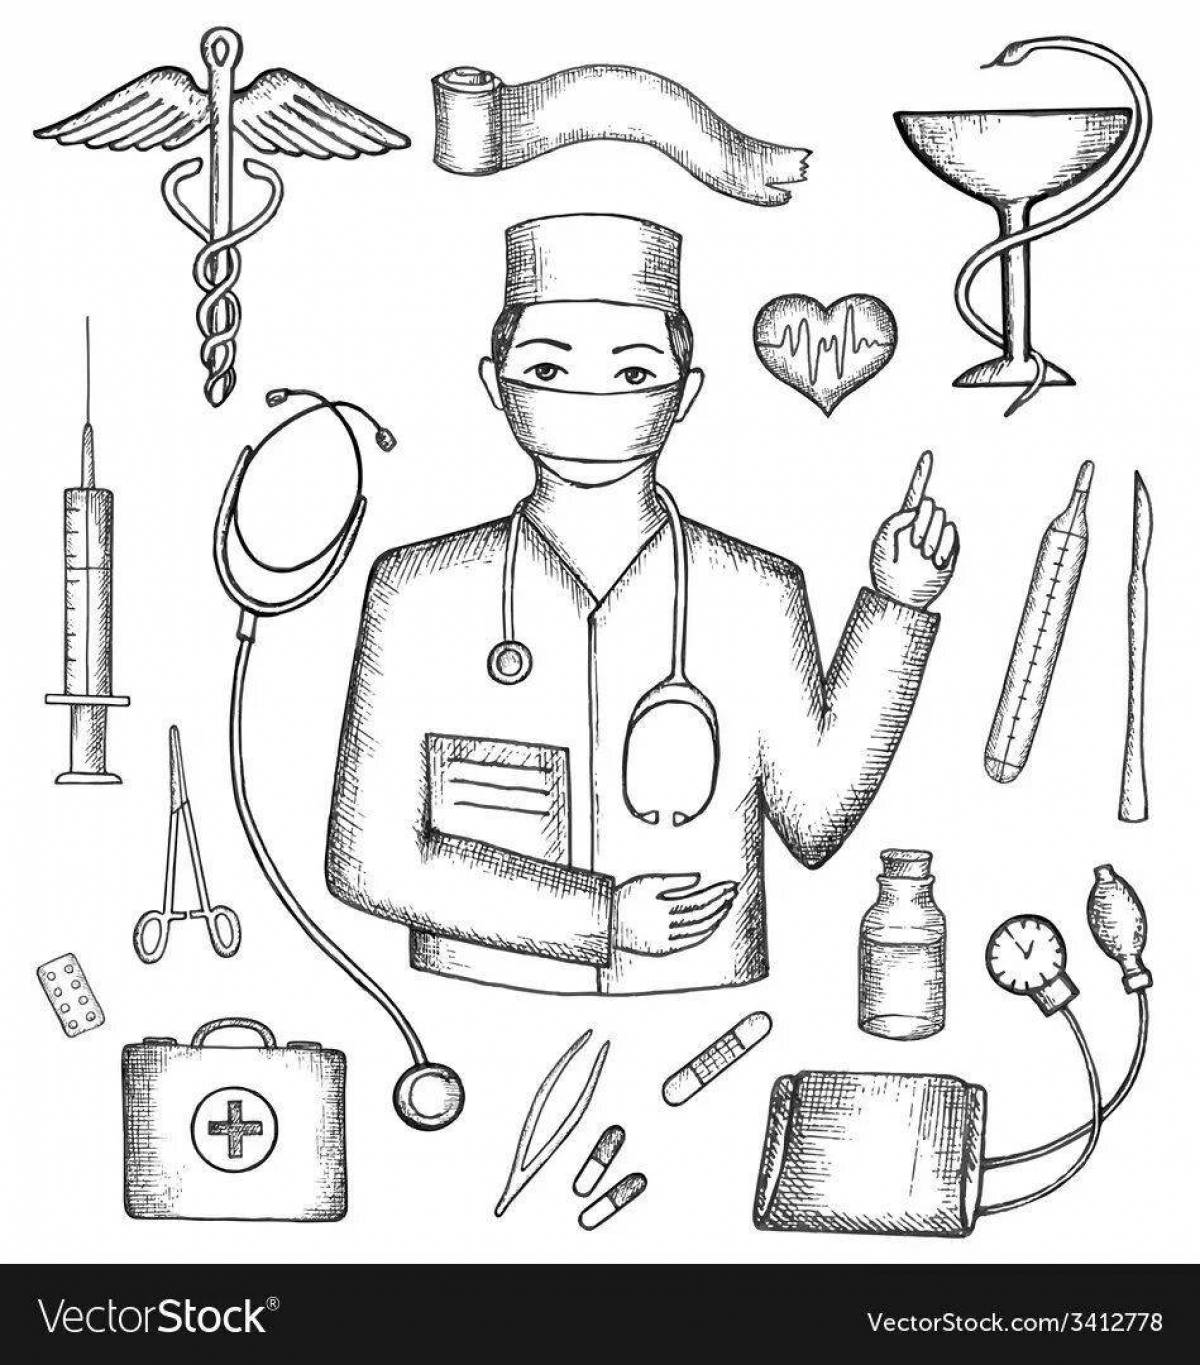 Coloring page nice medical instruments